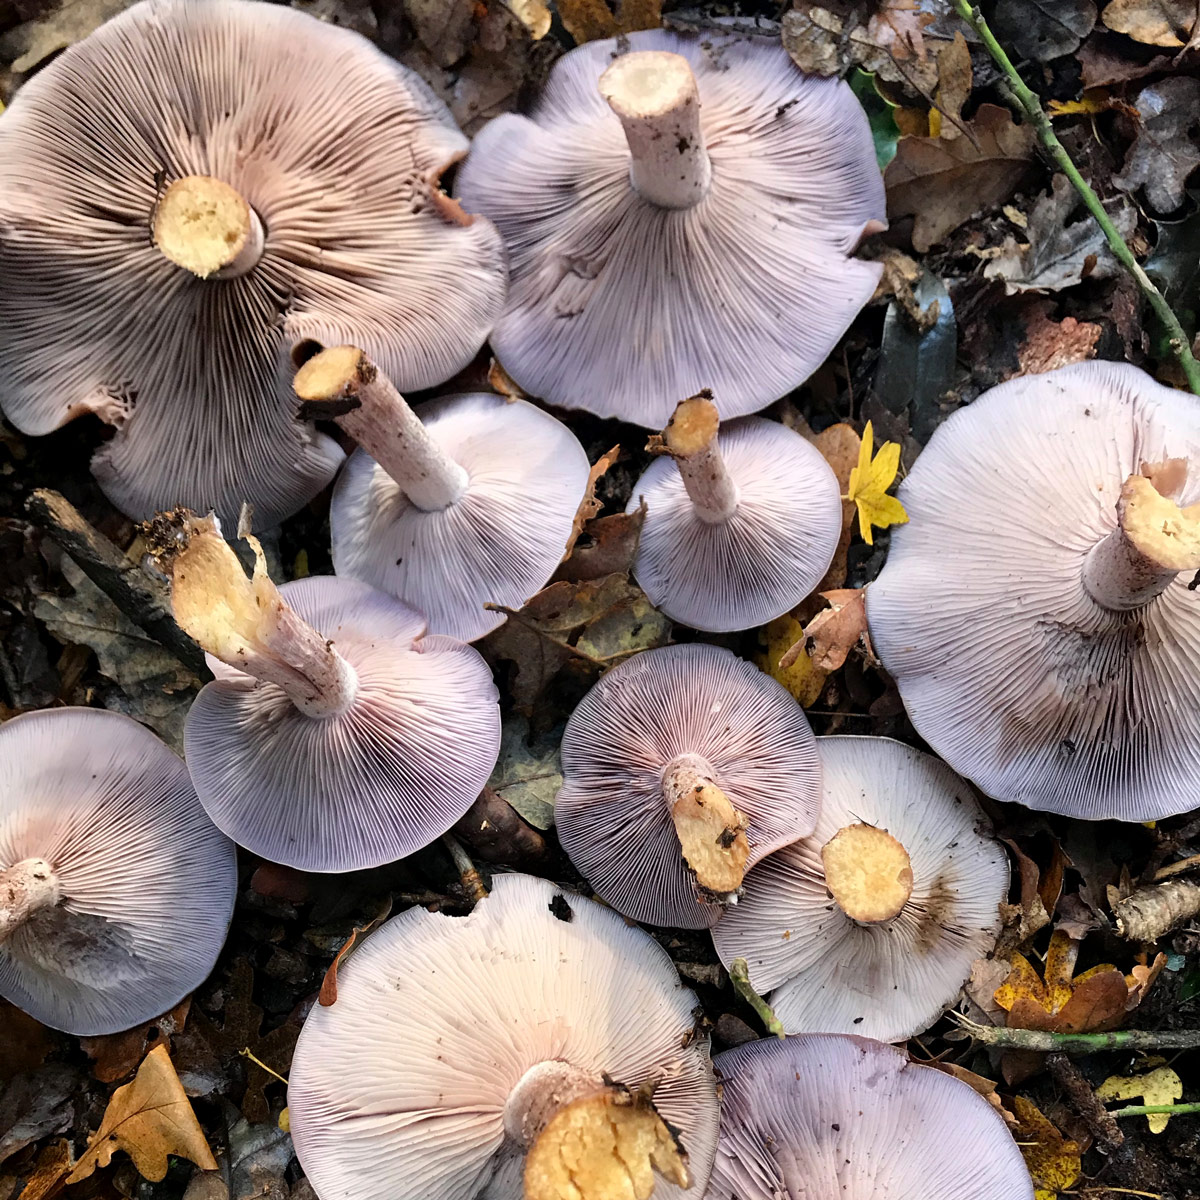 Harvested field blewits, lying upside down